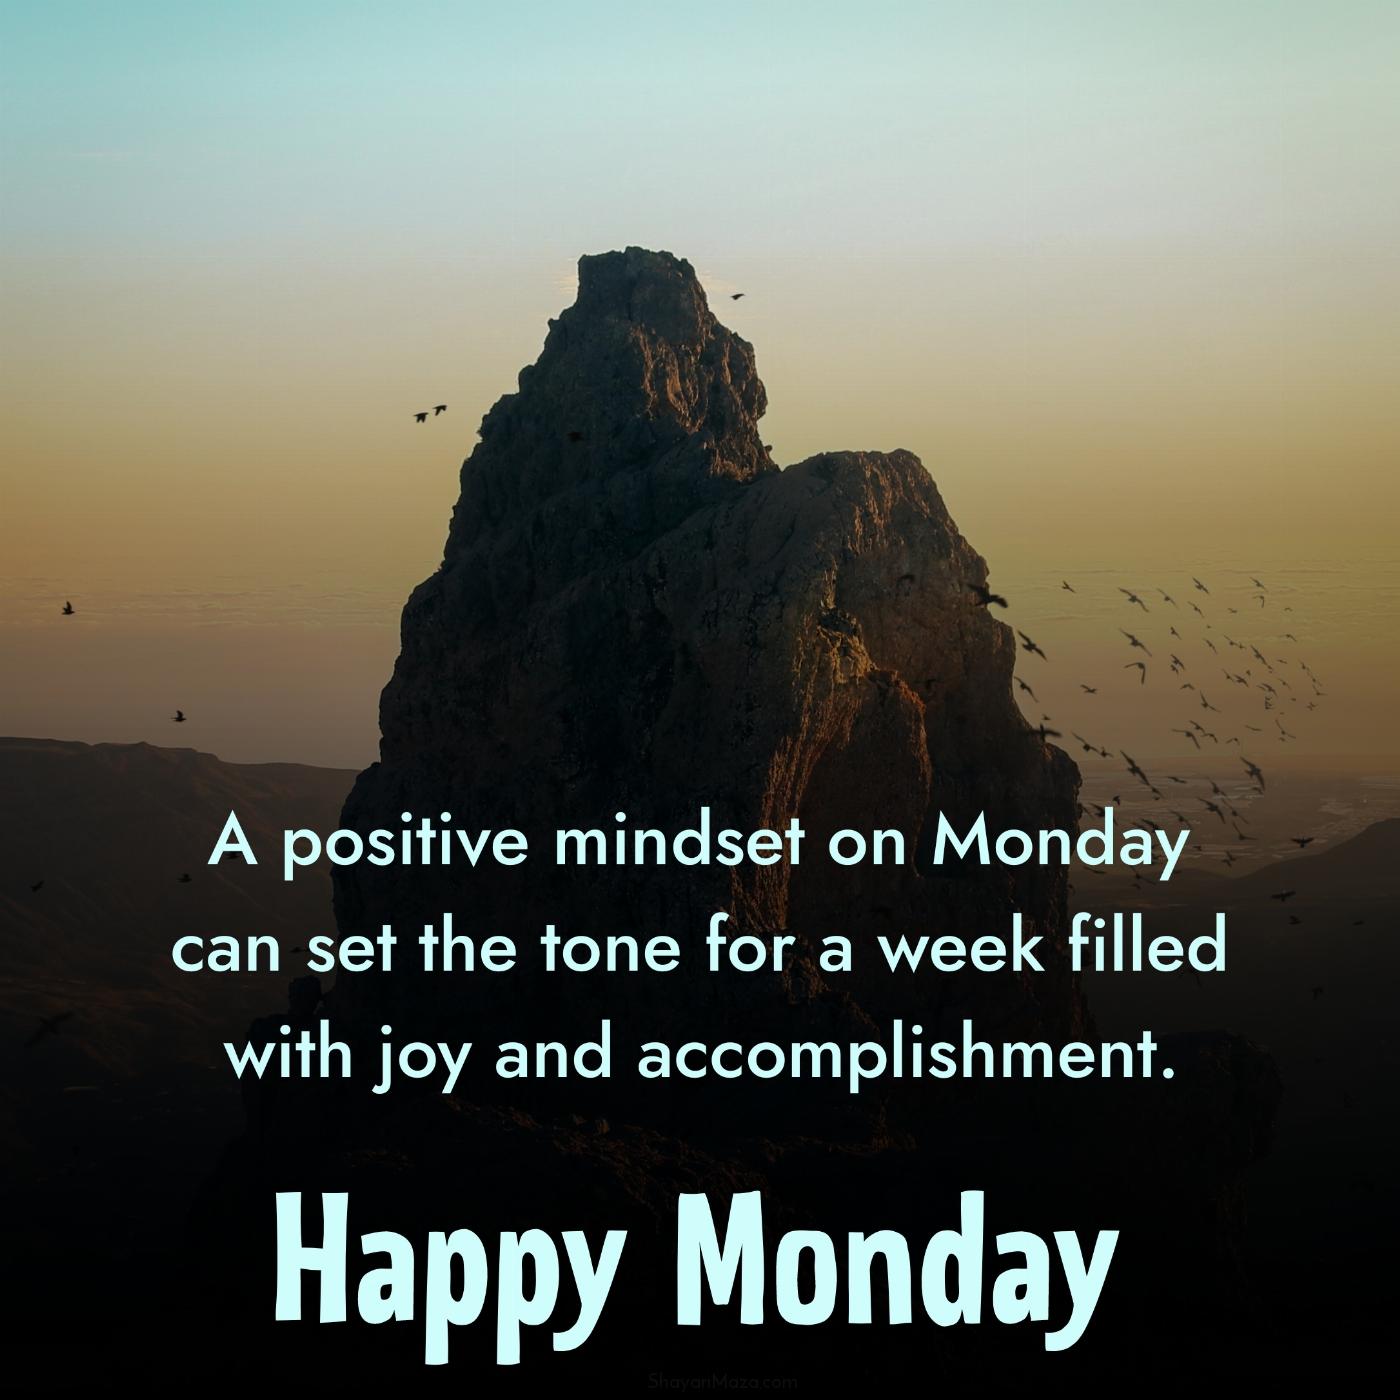 A positive mindset on Monday can set the tone for a week